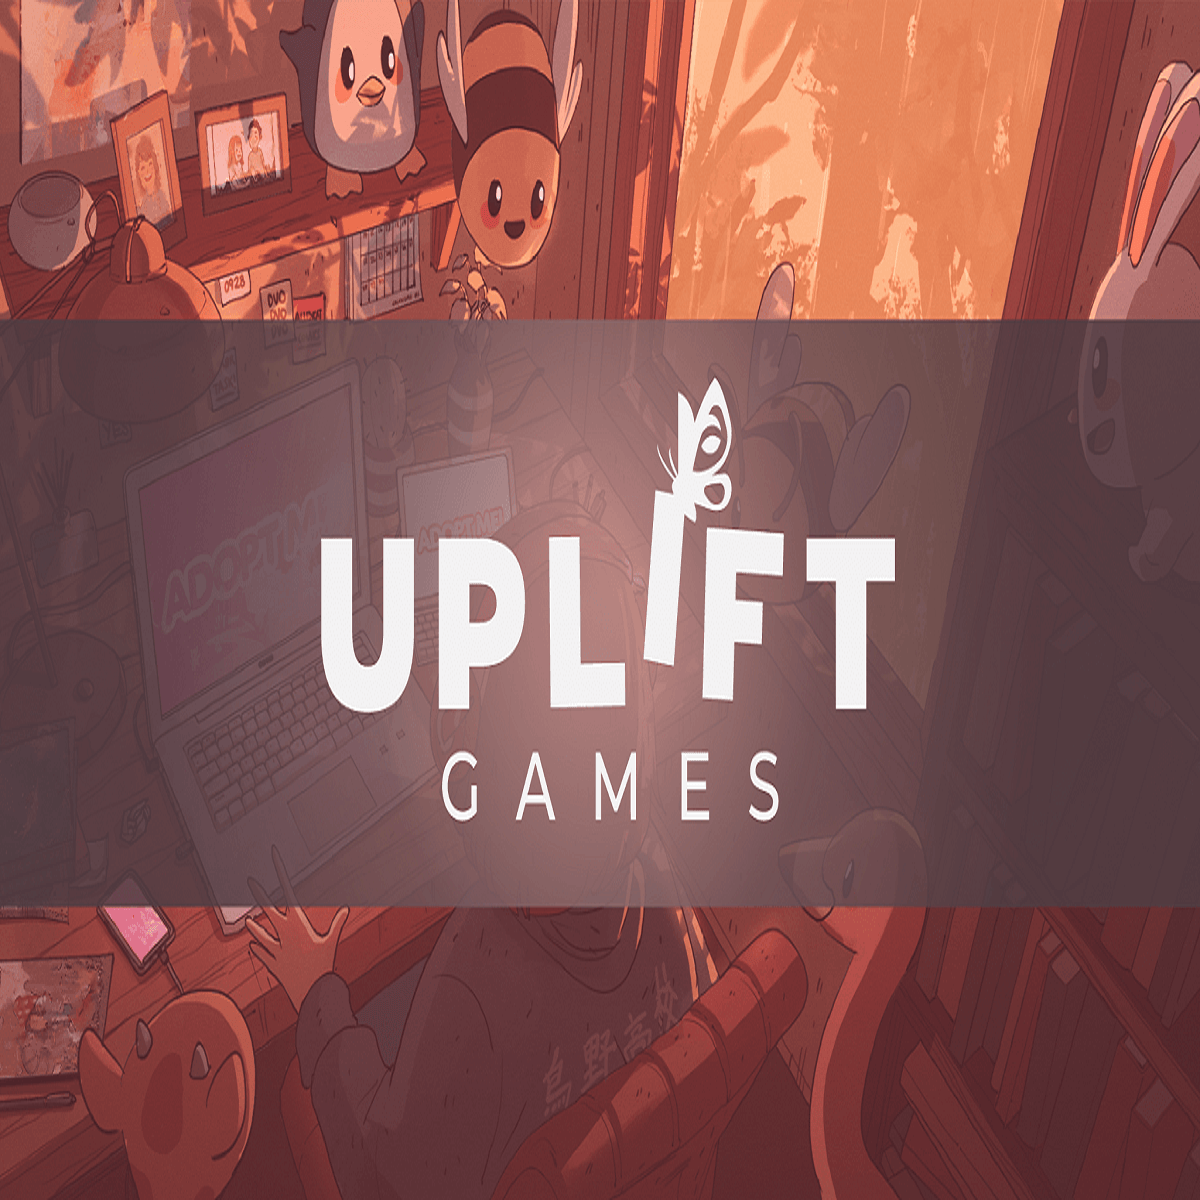 Developers behind record breaking Roblox game Adopt Me launch new studio,  Uplift Games